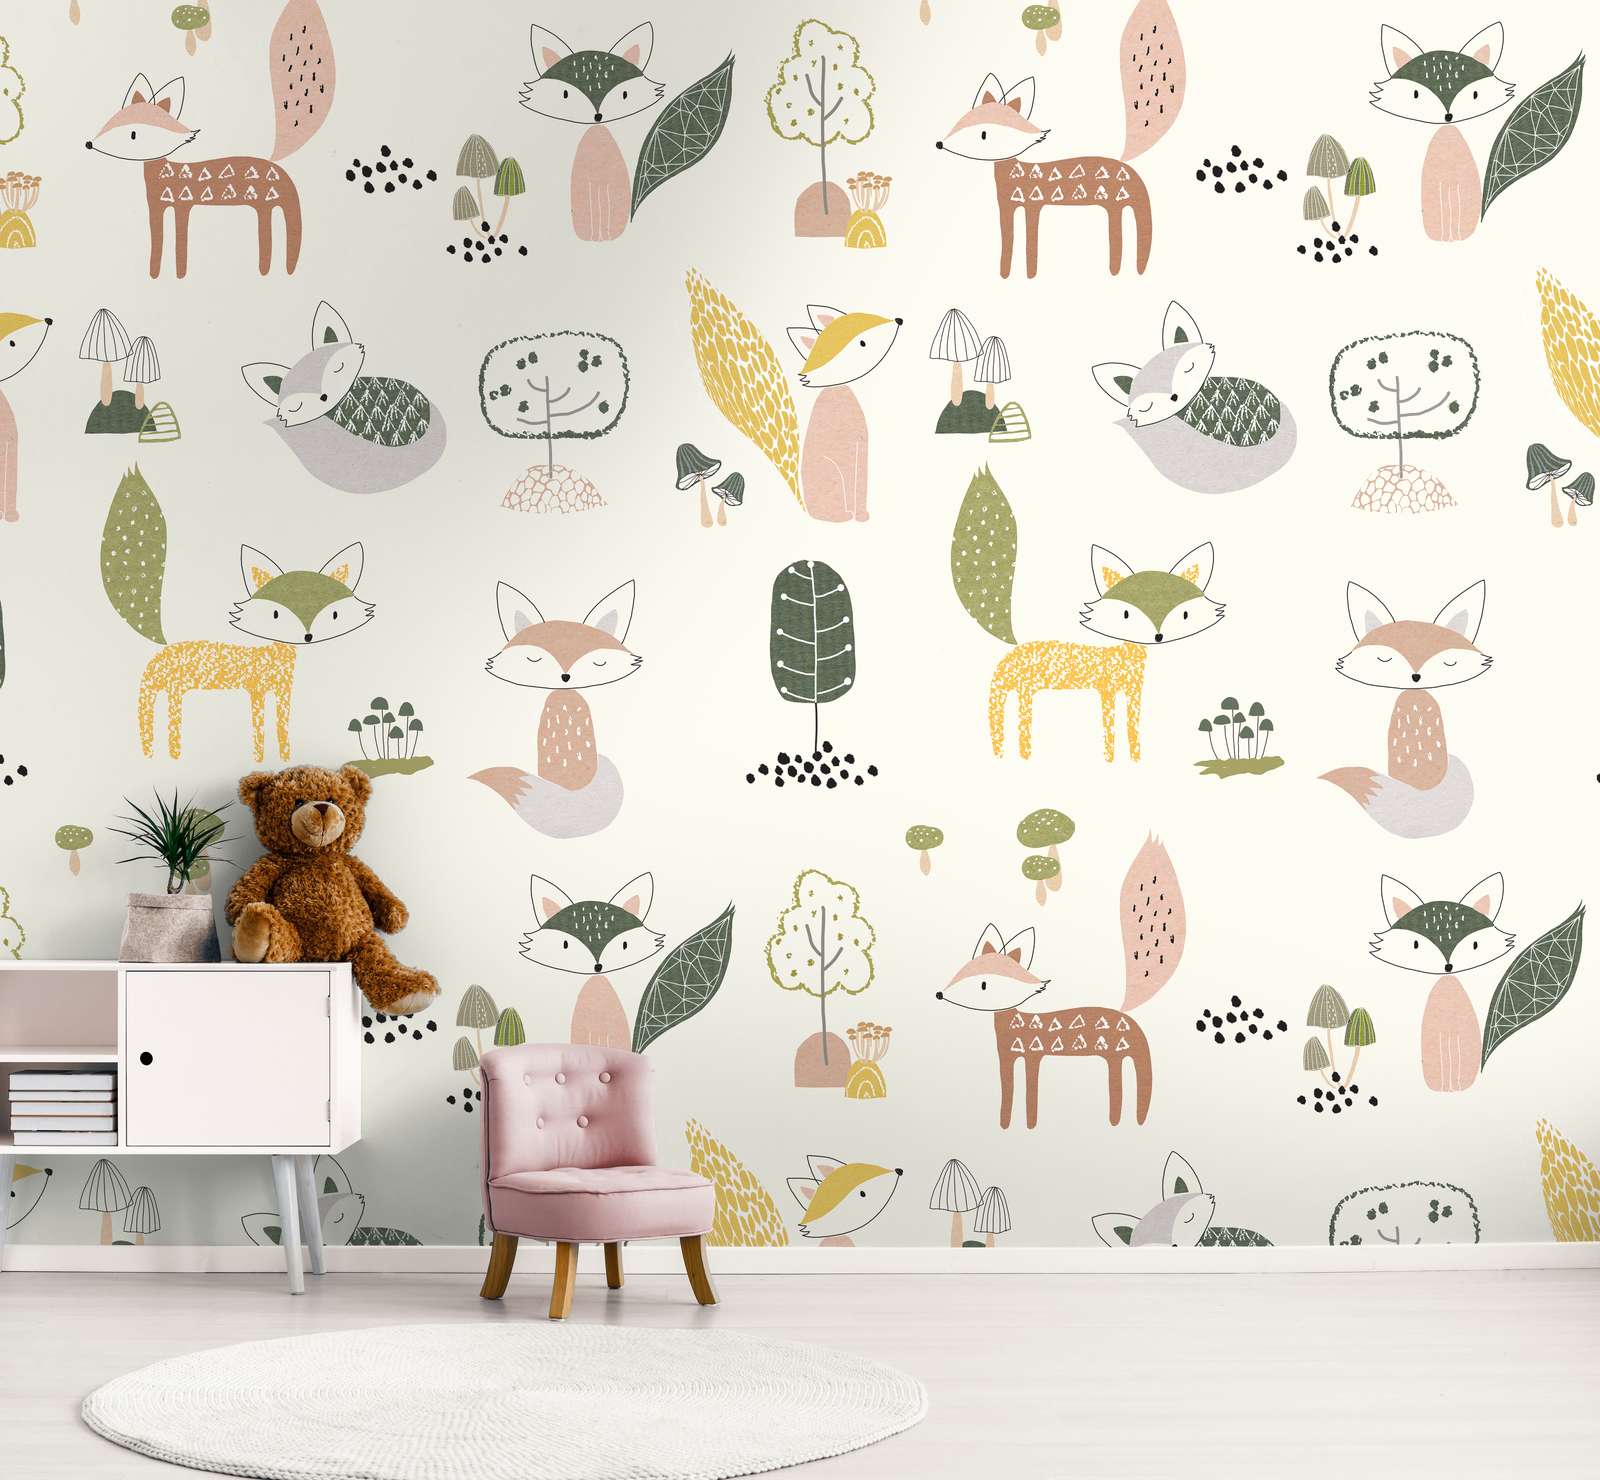             wallpaper child motif with foxes and mushrooms - coloured, cream, green
        